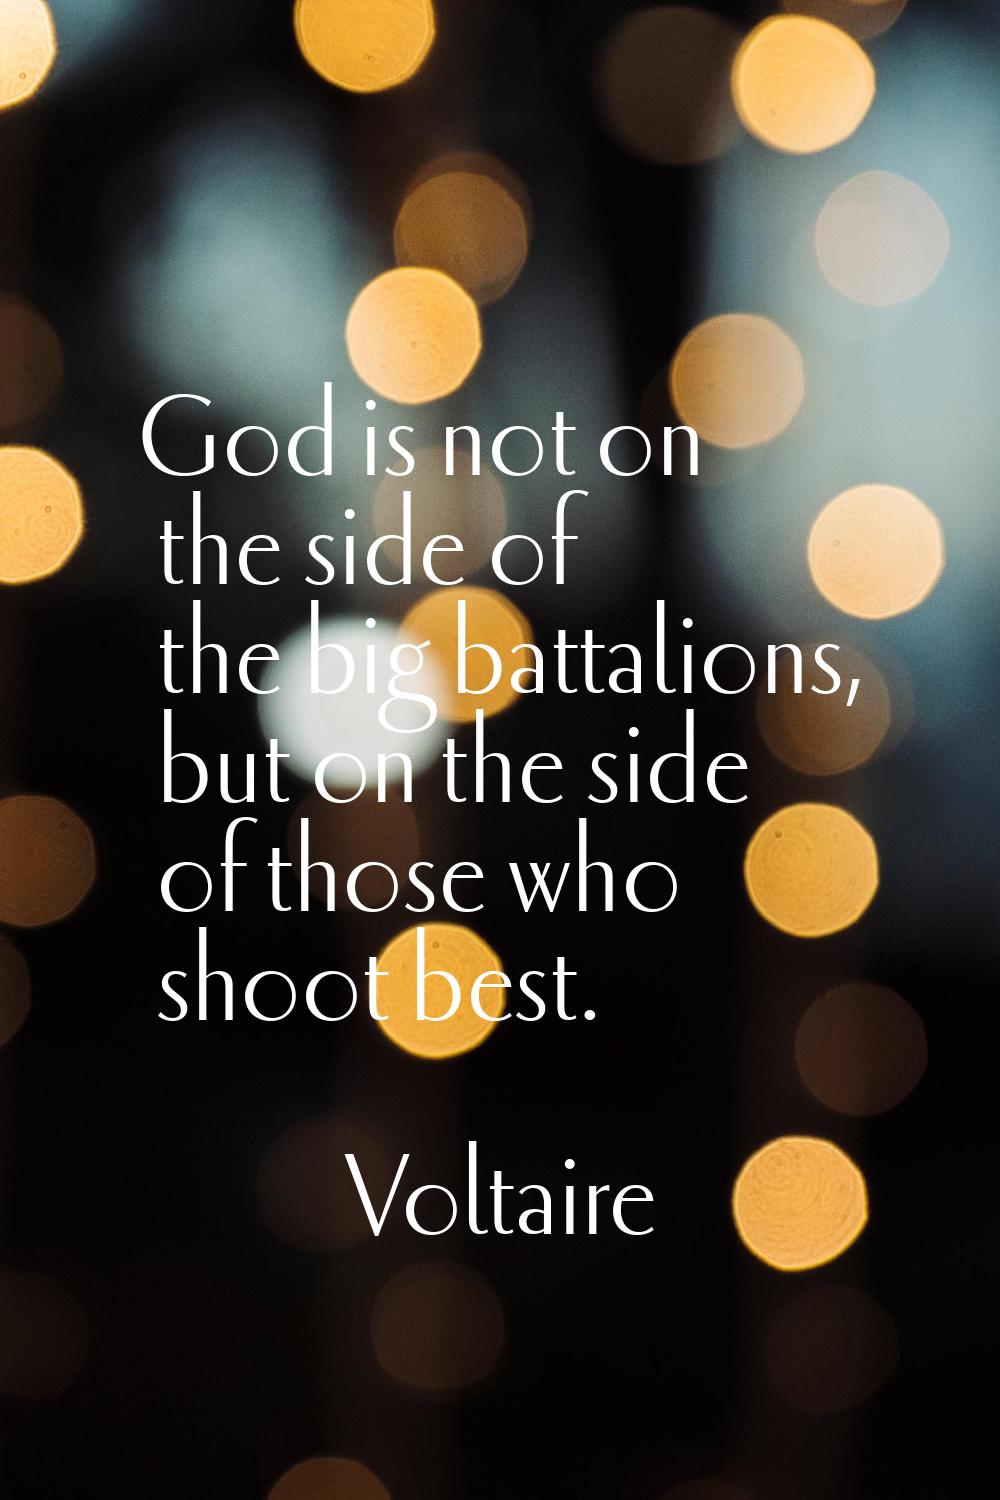 God is not on the side of the big battalions, but on the side of those who shoot best.